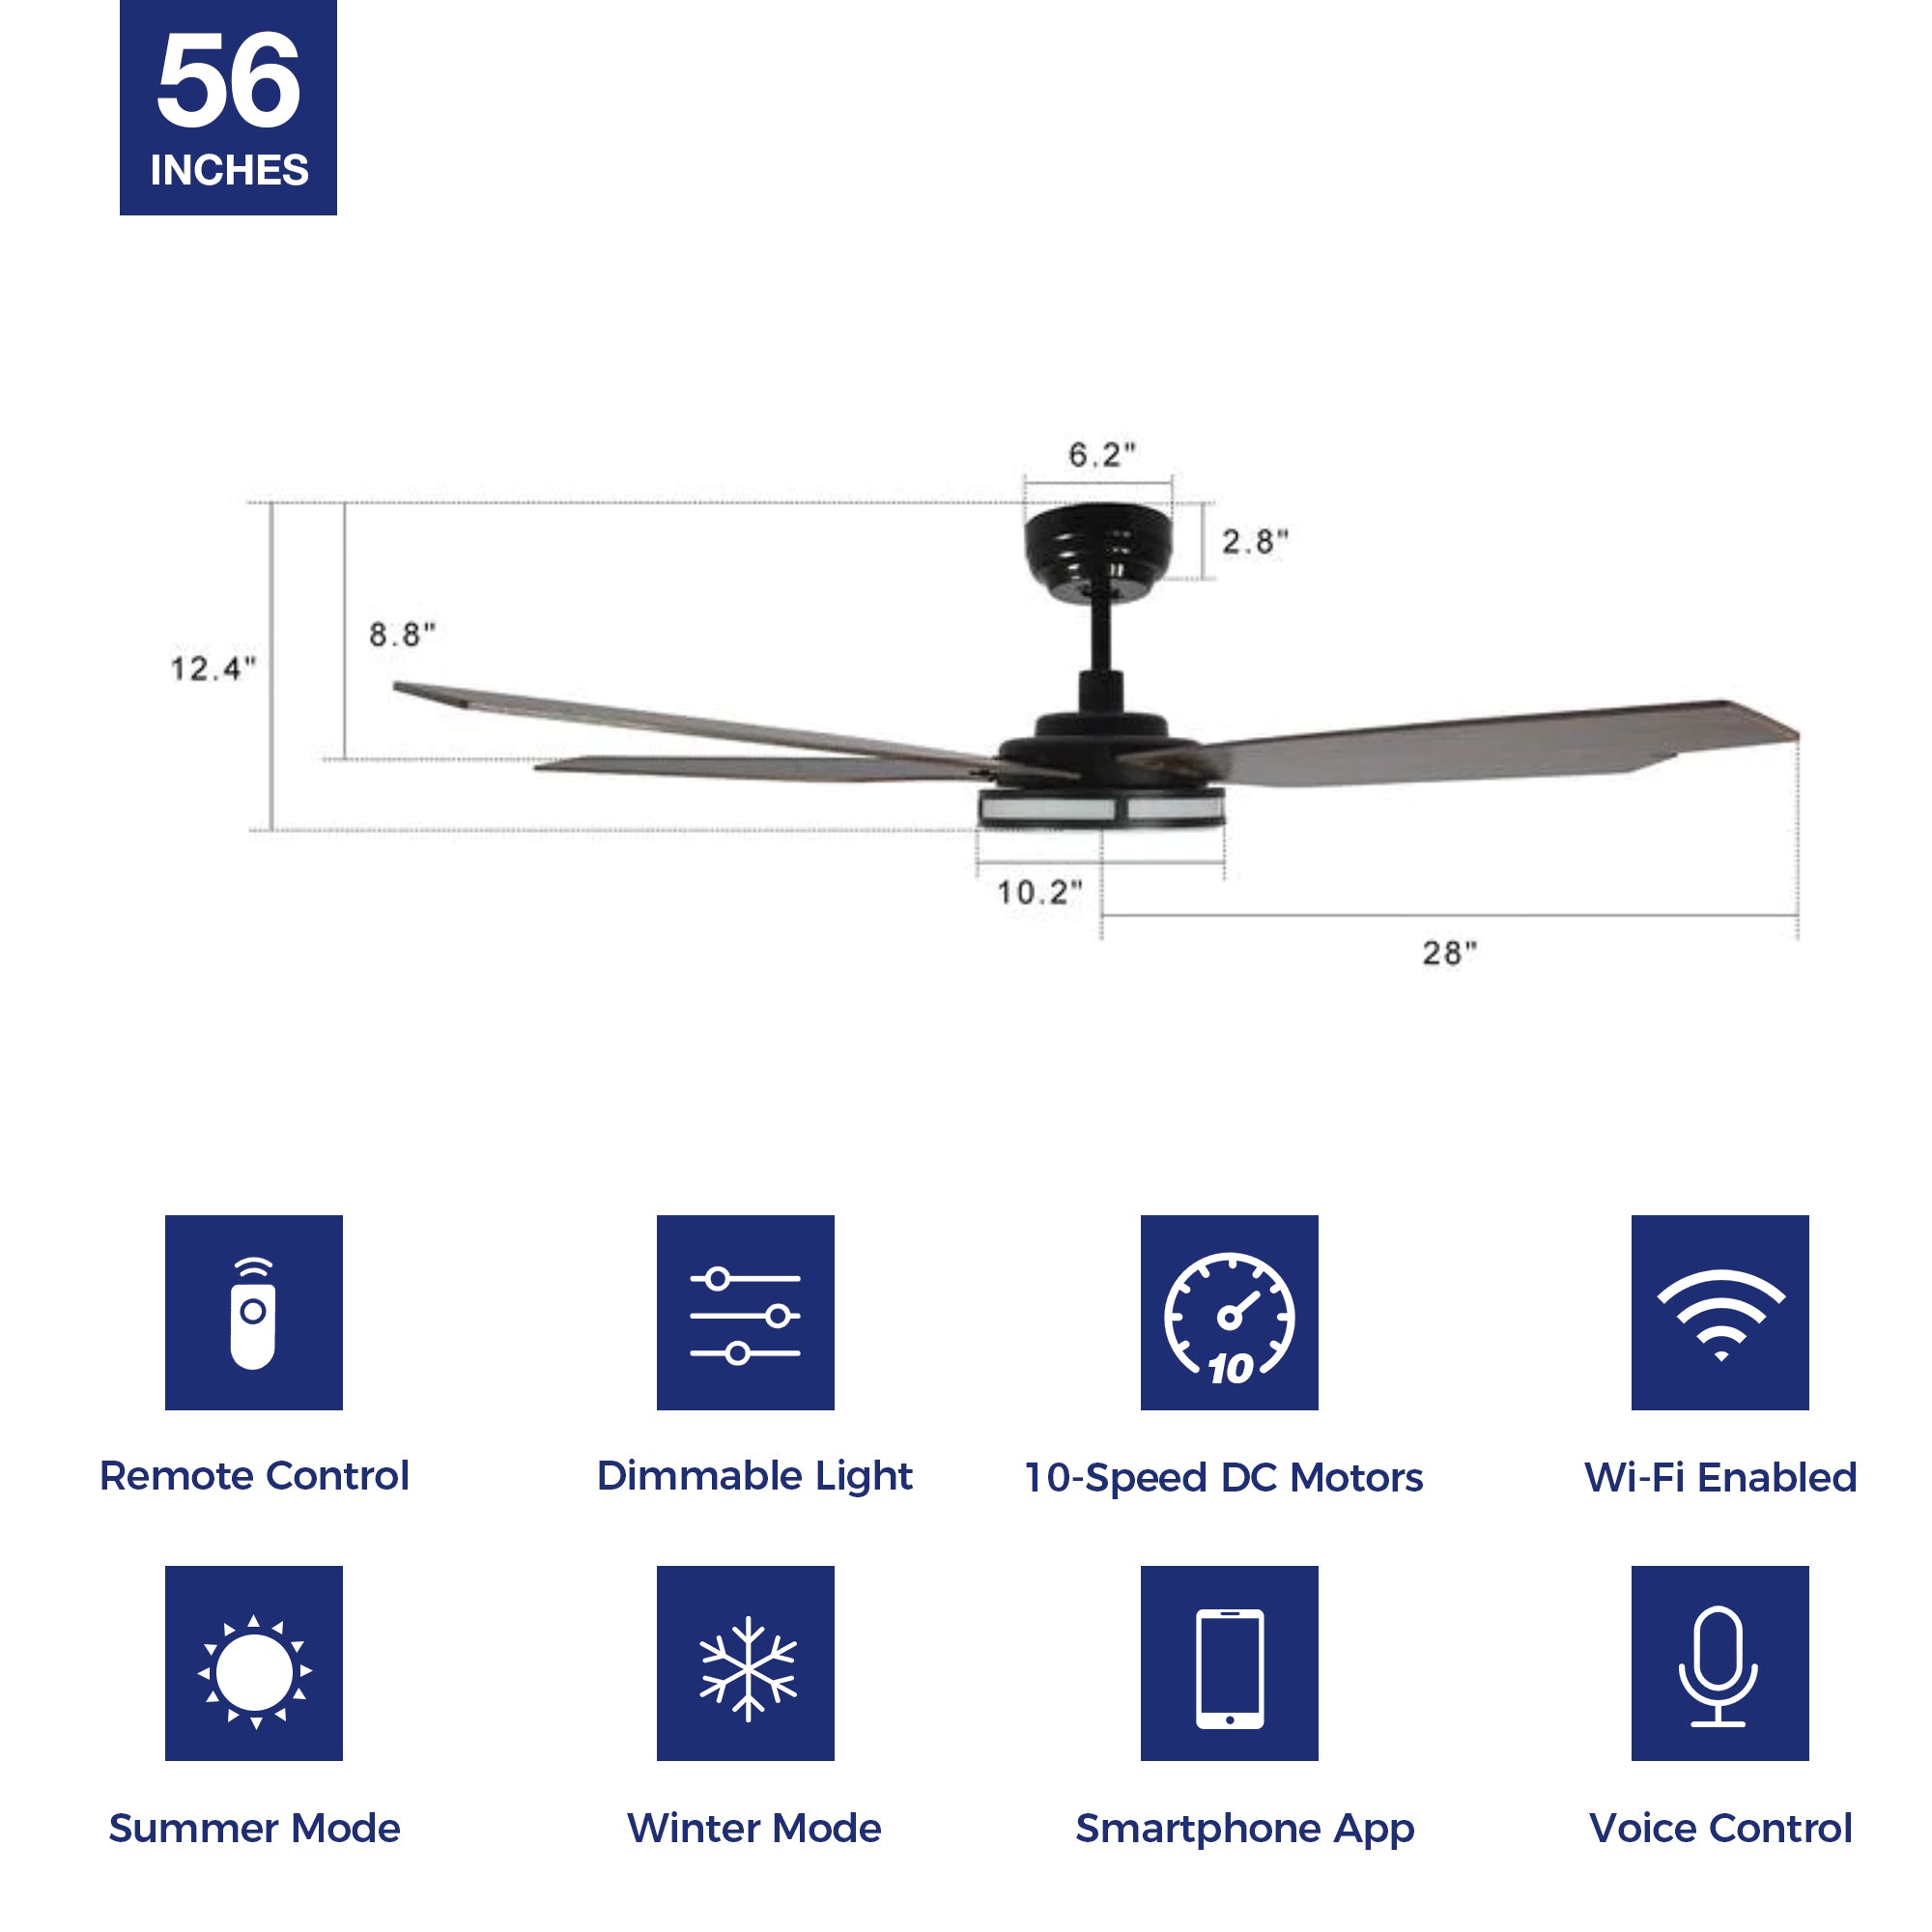 Explorer Outdoor 56&quot; Smart Ceiling Fan with LED Light Kit-Black Case and Dark Wood Fan Blades. The fan features Remote control, Wi-Fi apps, and Voice control technology (compatible with Amazon Alexa and Google Home Assistant ) to set fan preferences. Equipped with 3000-lumen dimmable LED lights and a 10-speed DC Motor (5300CFM airflow output), it brings you cool and bright. 